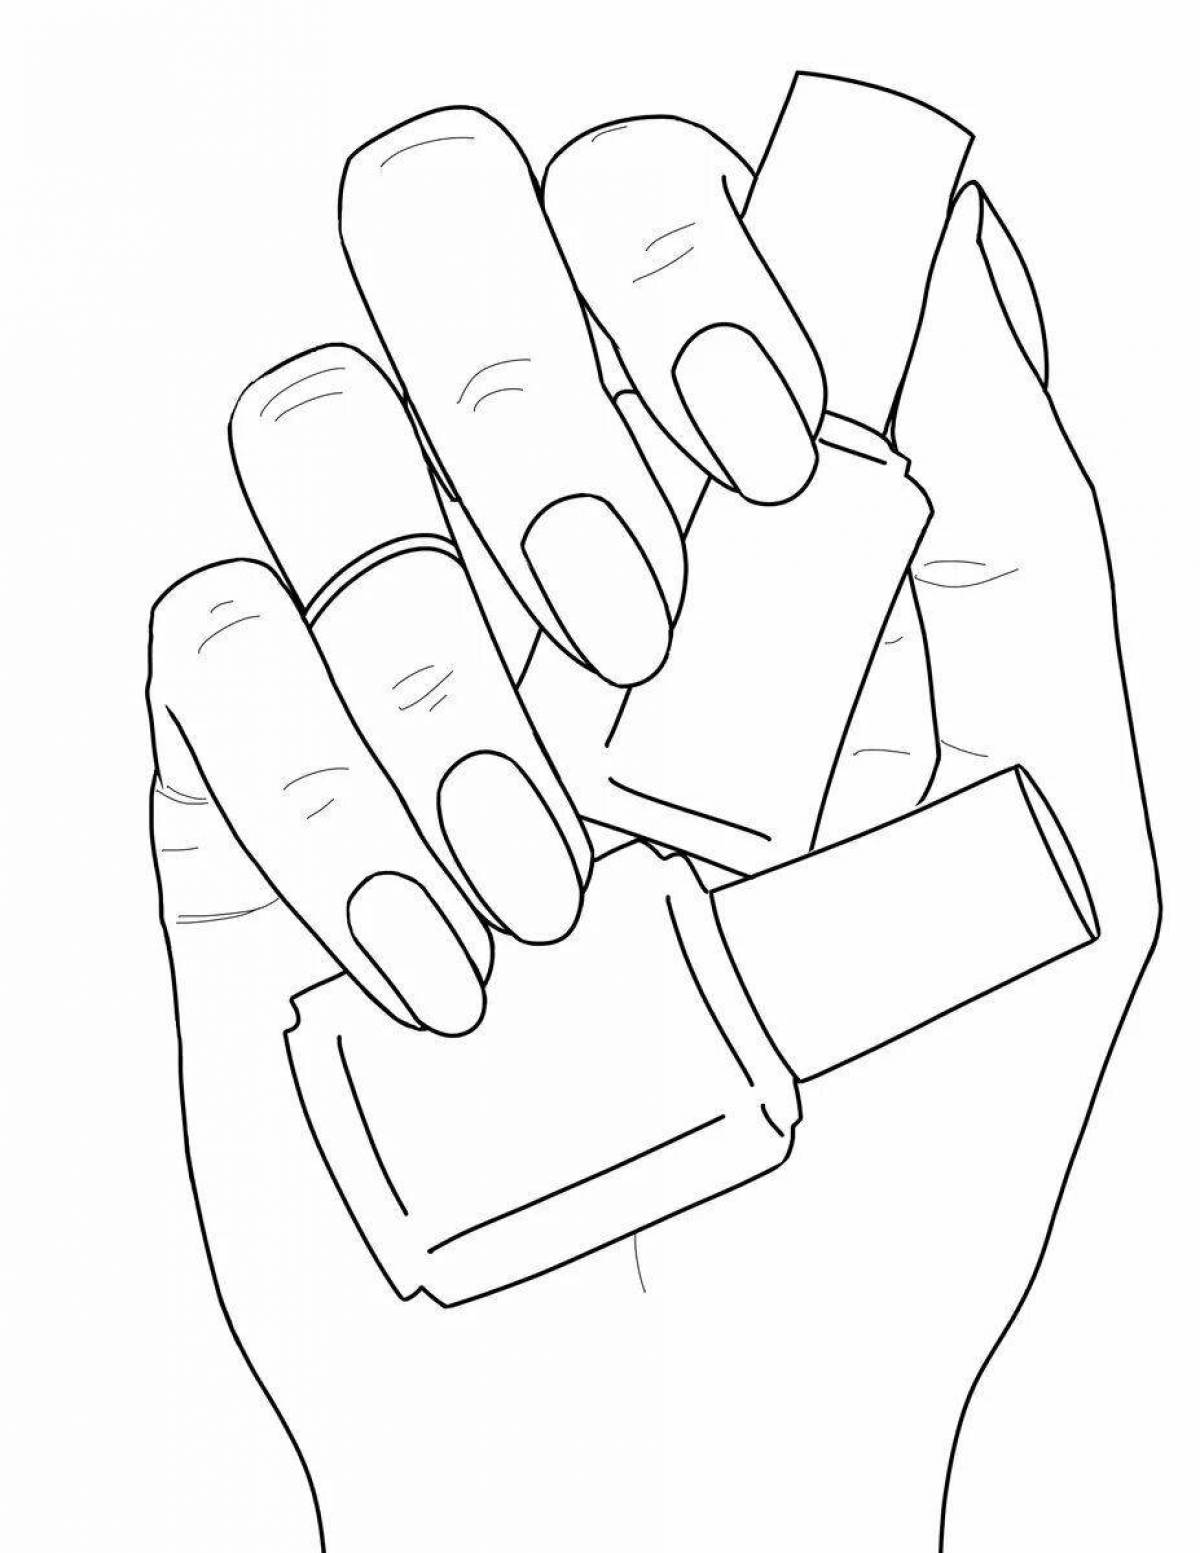 Exquisite nail art coloring book